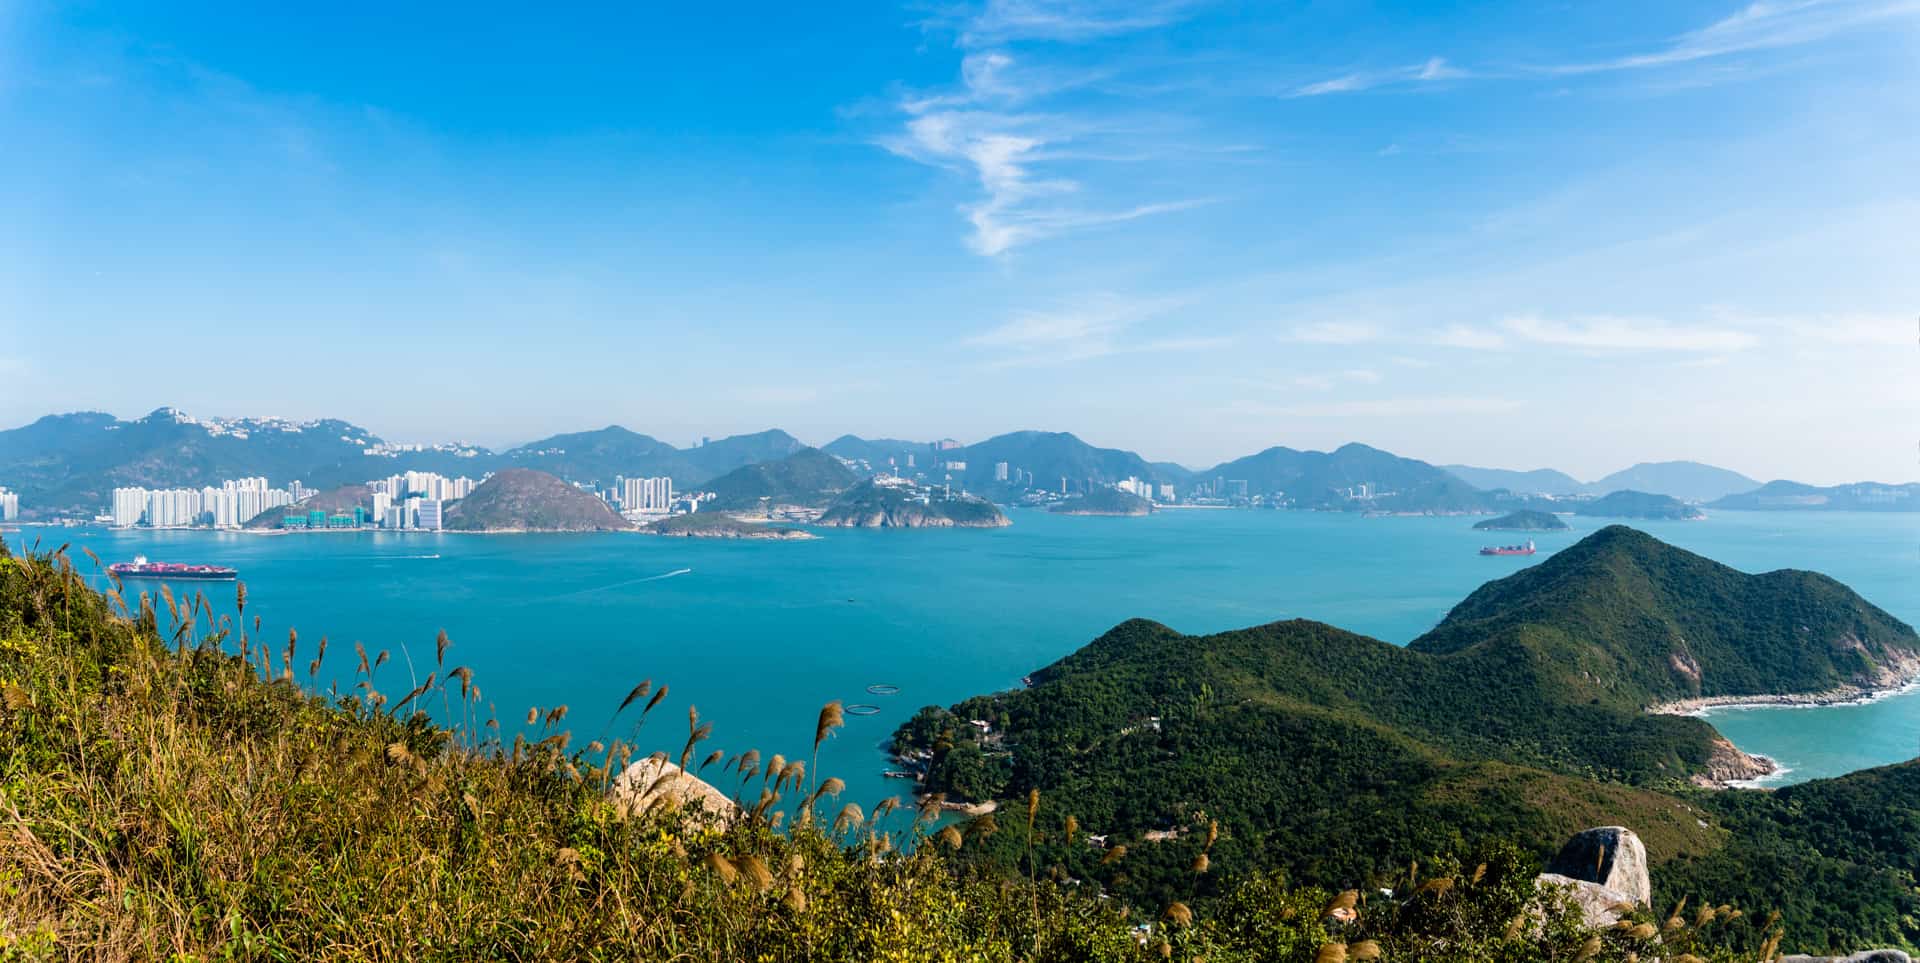 SerialHikers - Alternative Travel Blog SerialHikers - Engaged Travel & Without Flight Destination Hong Kong: our travel guide East Asia, Hong-Kong City, Destinations